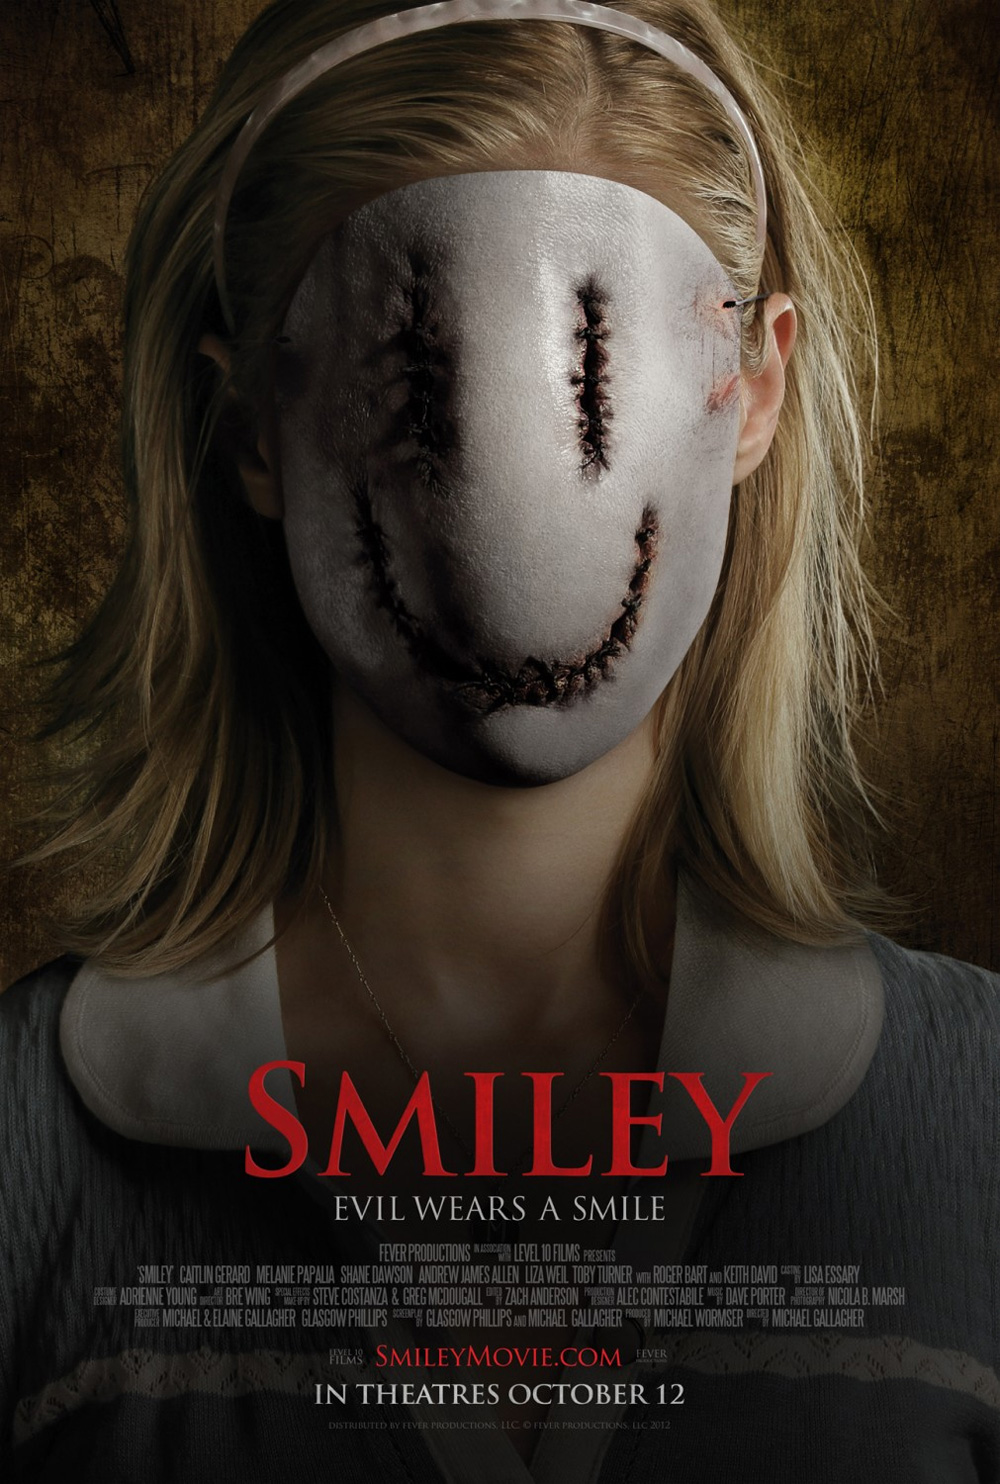 Poster Smiley